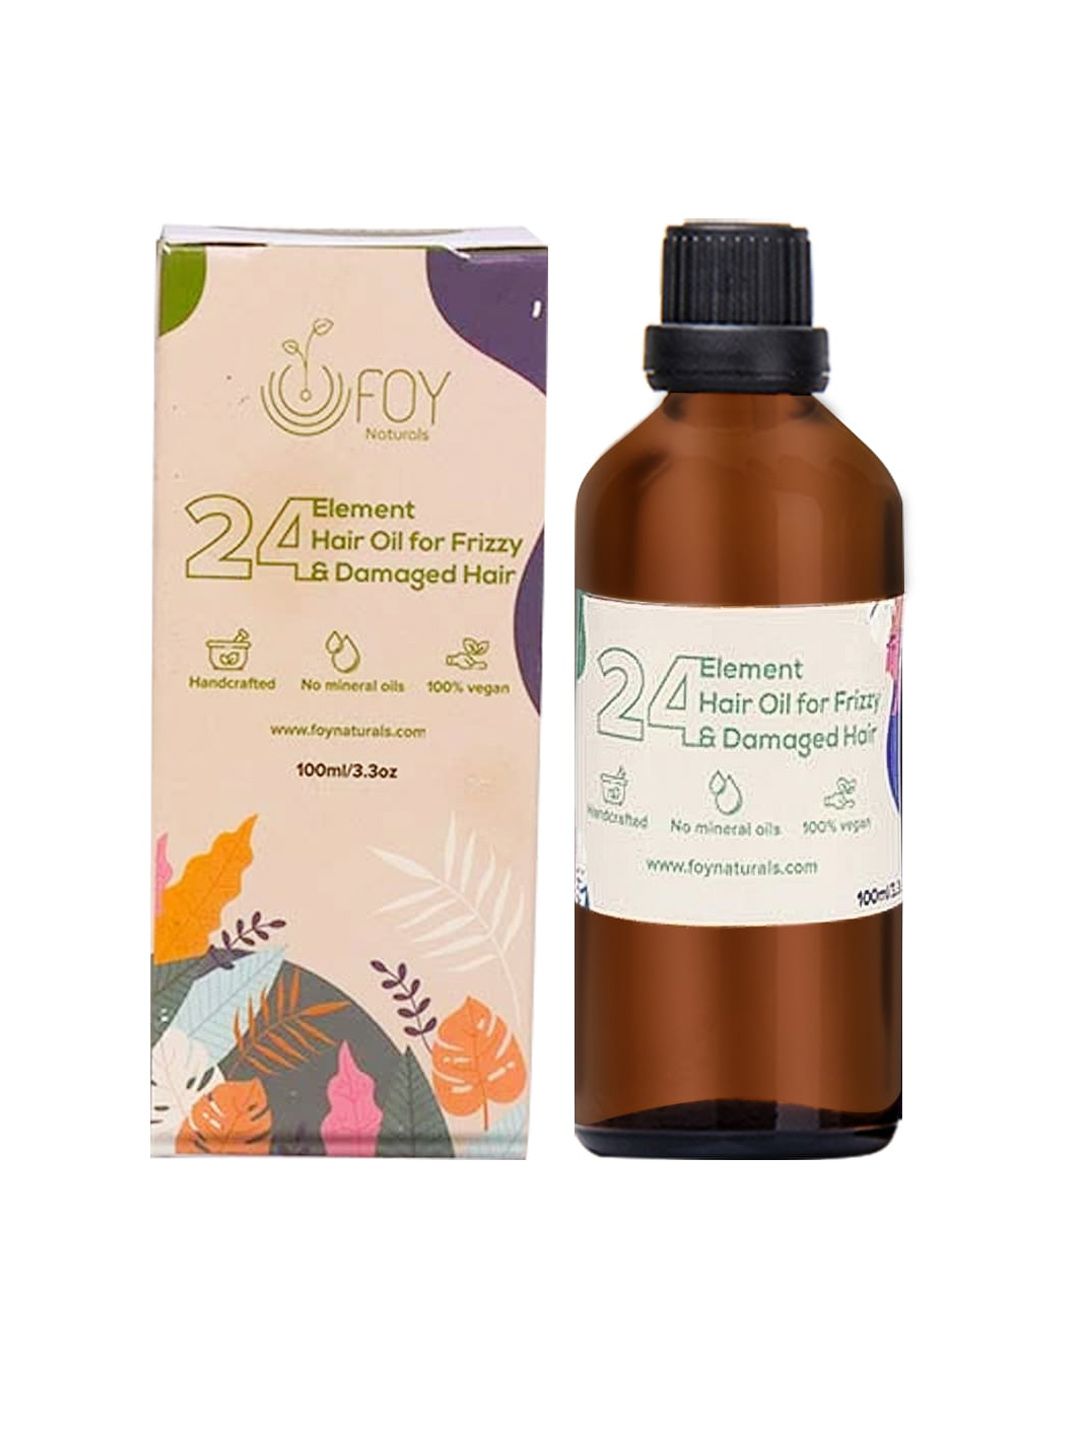 FOY Naturals 24 Element Oil for Frizzy & Damaged Hair 100 ml Price in India